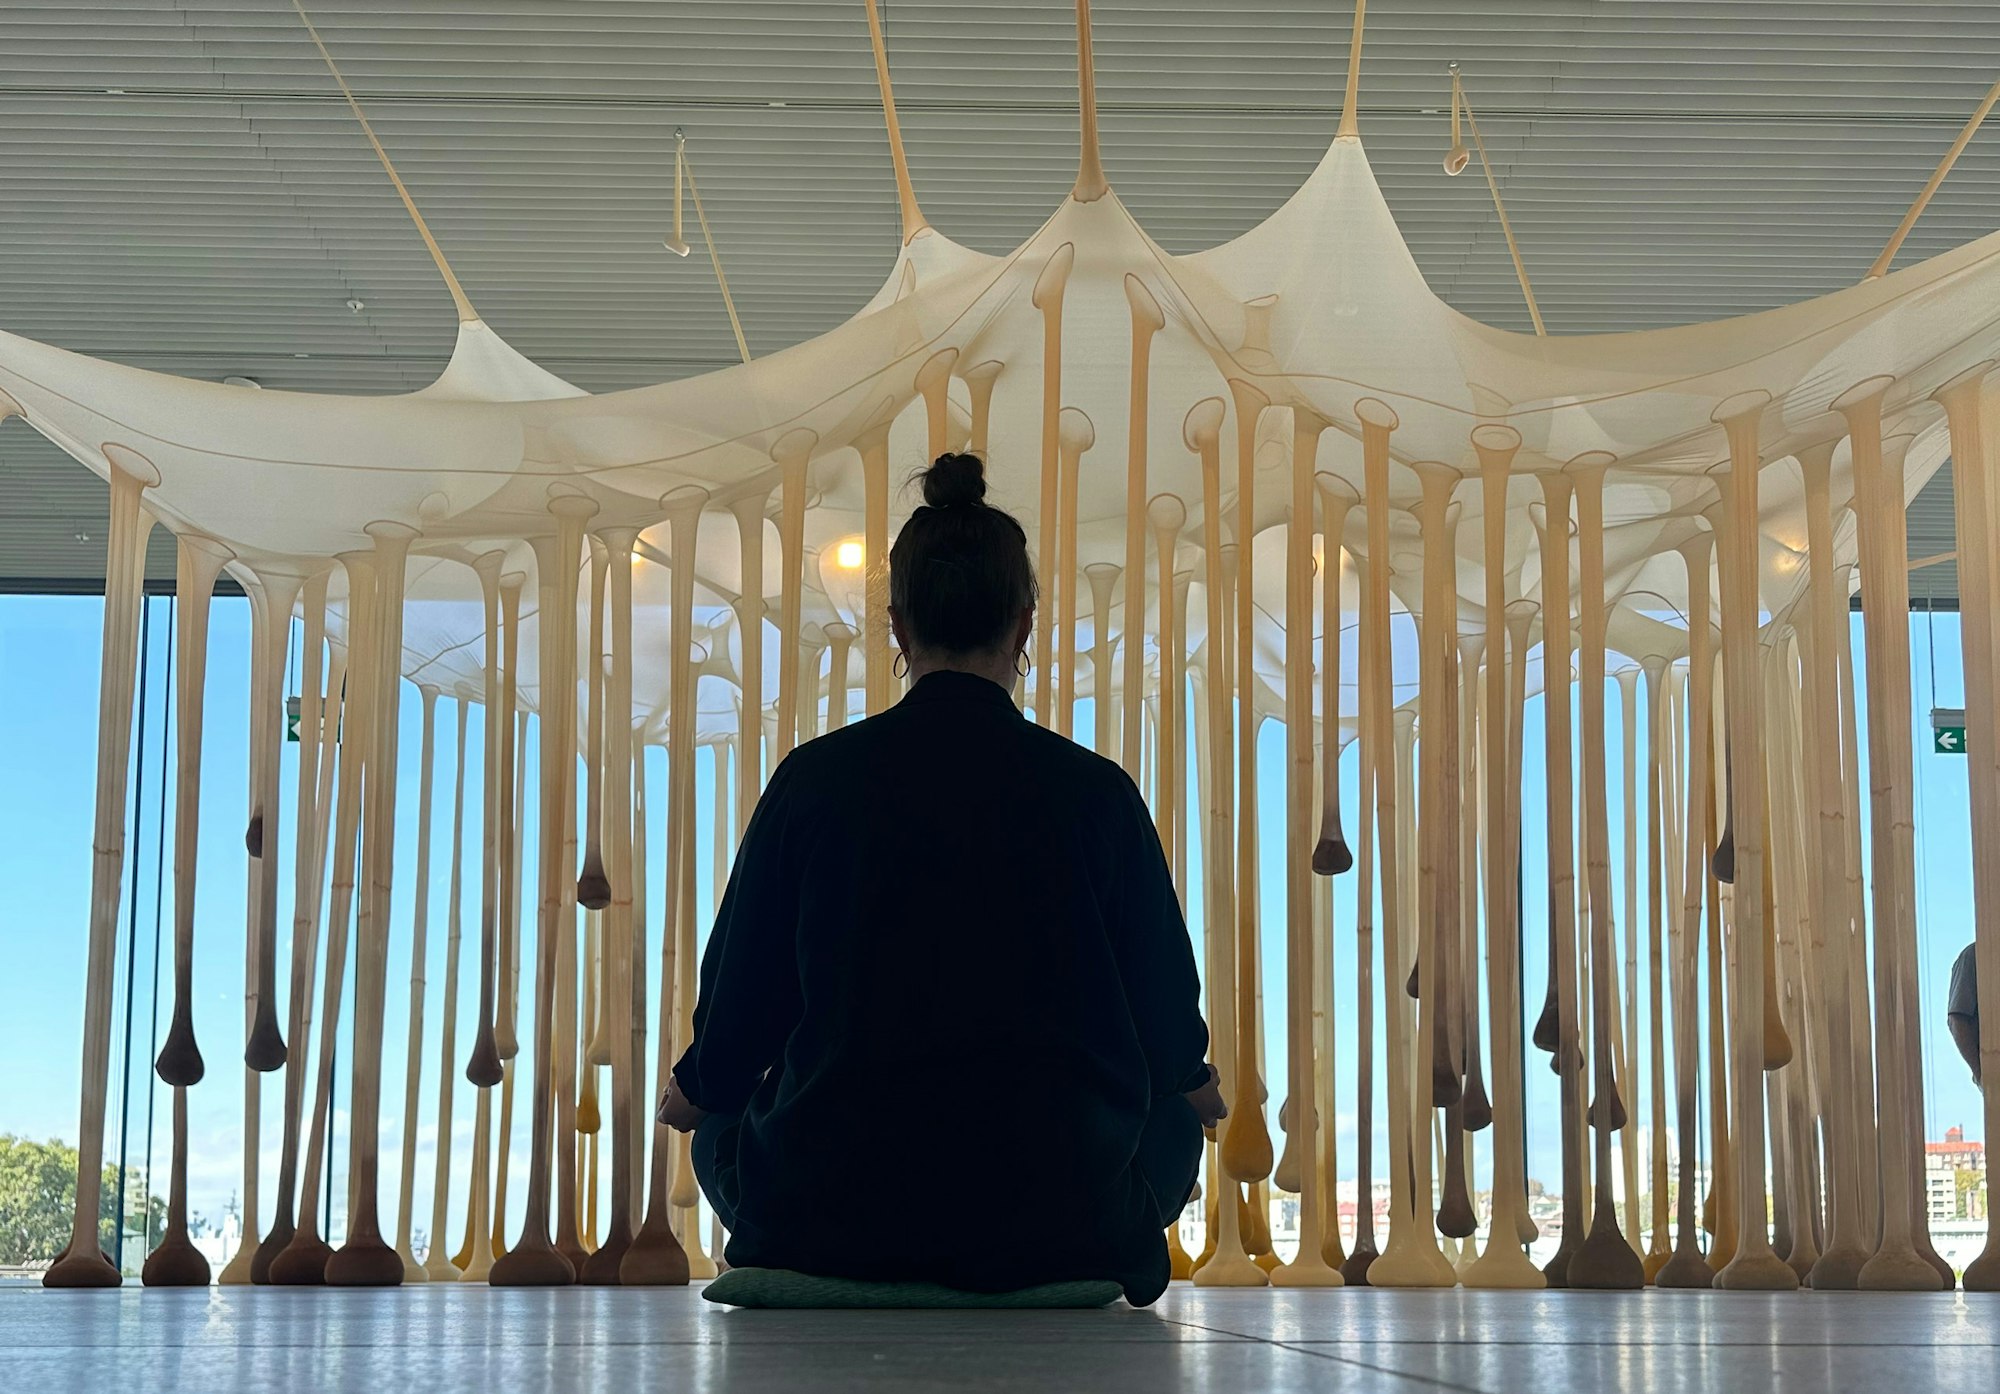 A person seated on a cushion on the floor in front of a large hanging installation